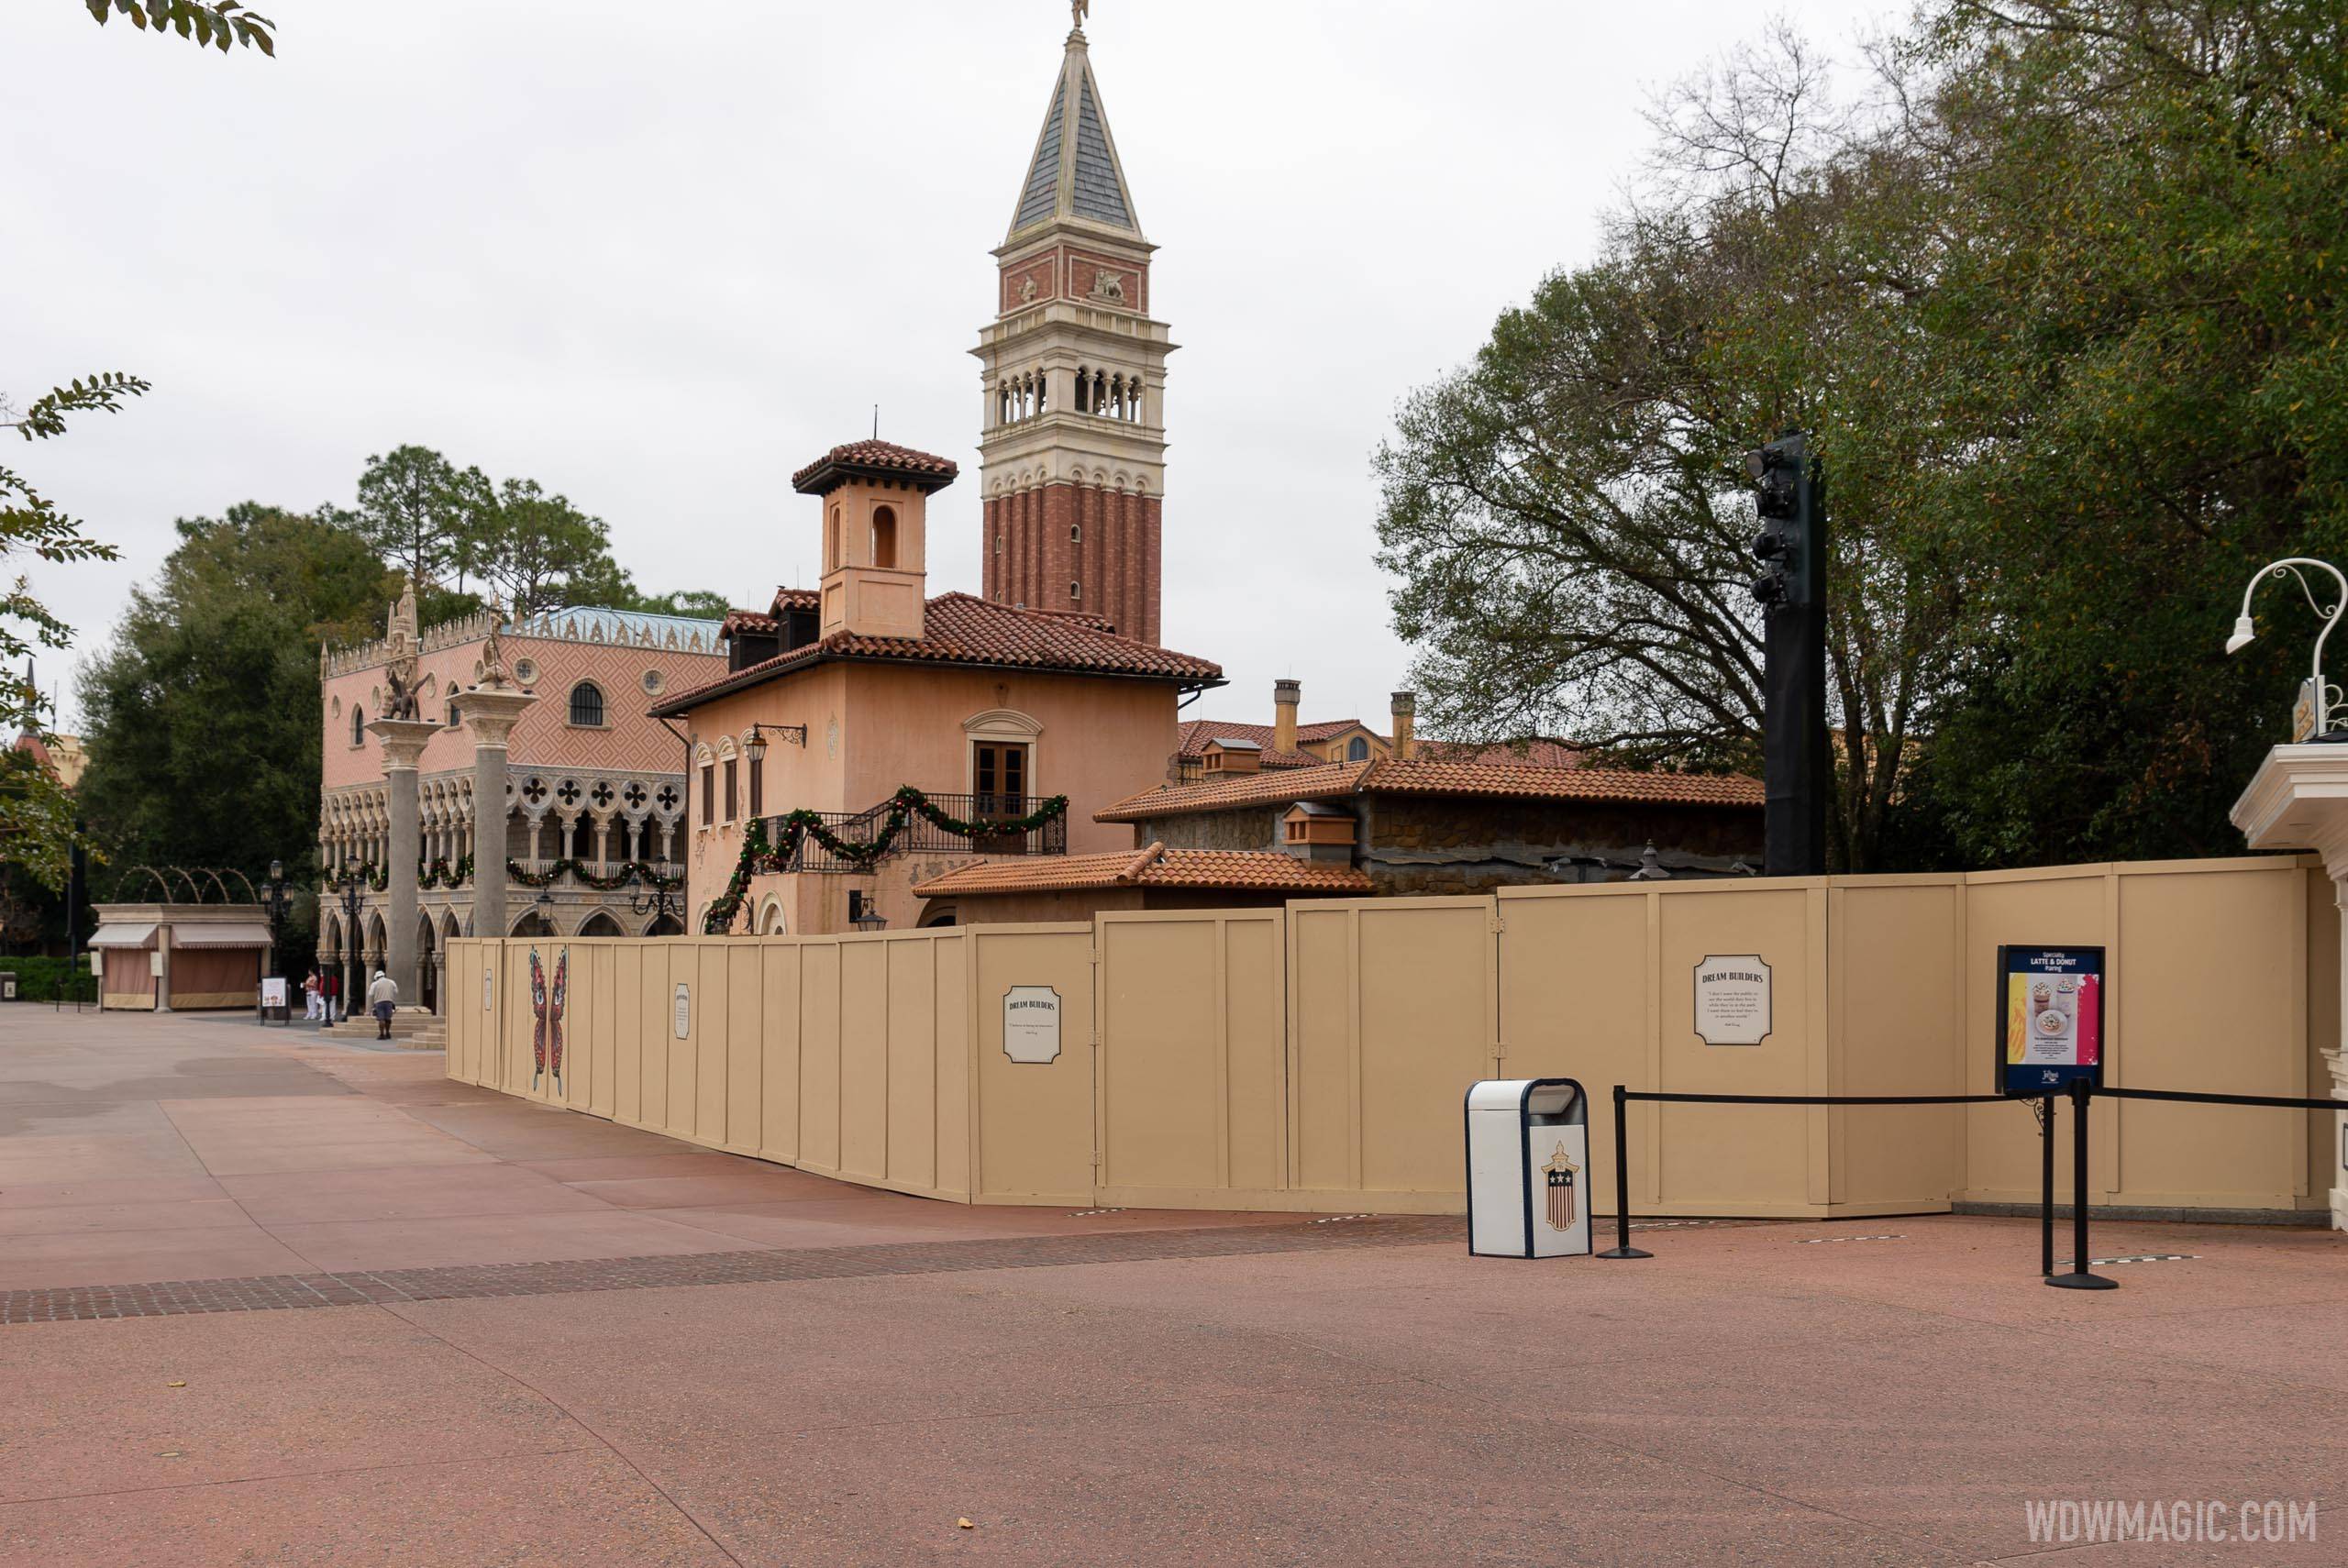 PHOTOS - Gelateria Toscana at the Italy pavilion takes shape as main building is installed overnight